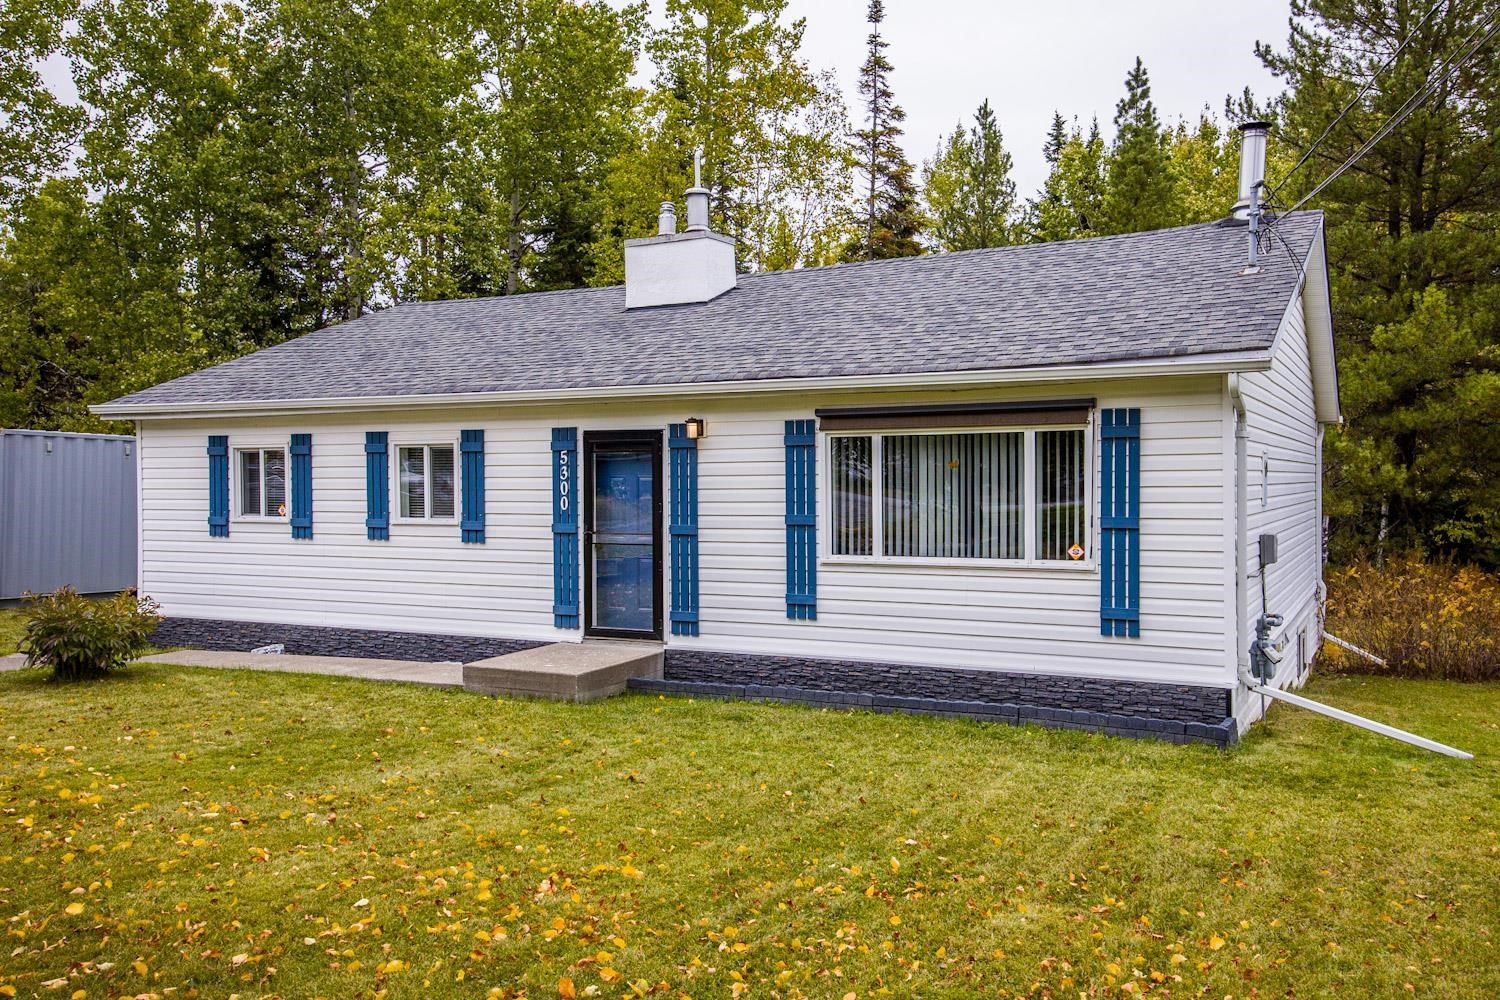 Main Photo: 5300 GRAVES Road in Prince George: North Blackburn House for sale (PG City South East (Zone 75))  : MLS®# R2620046